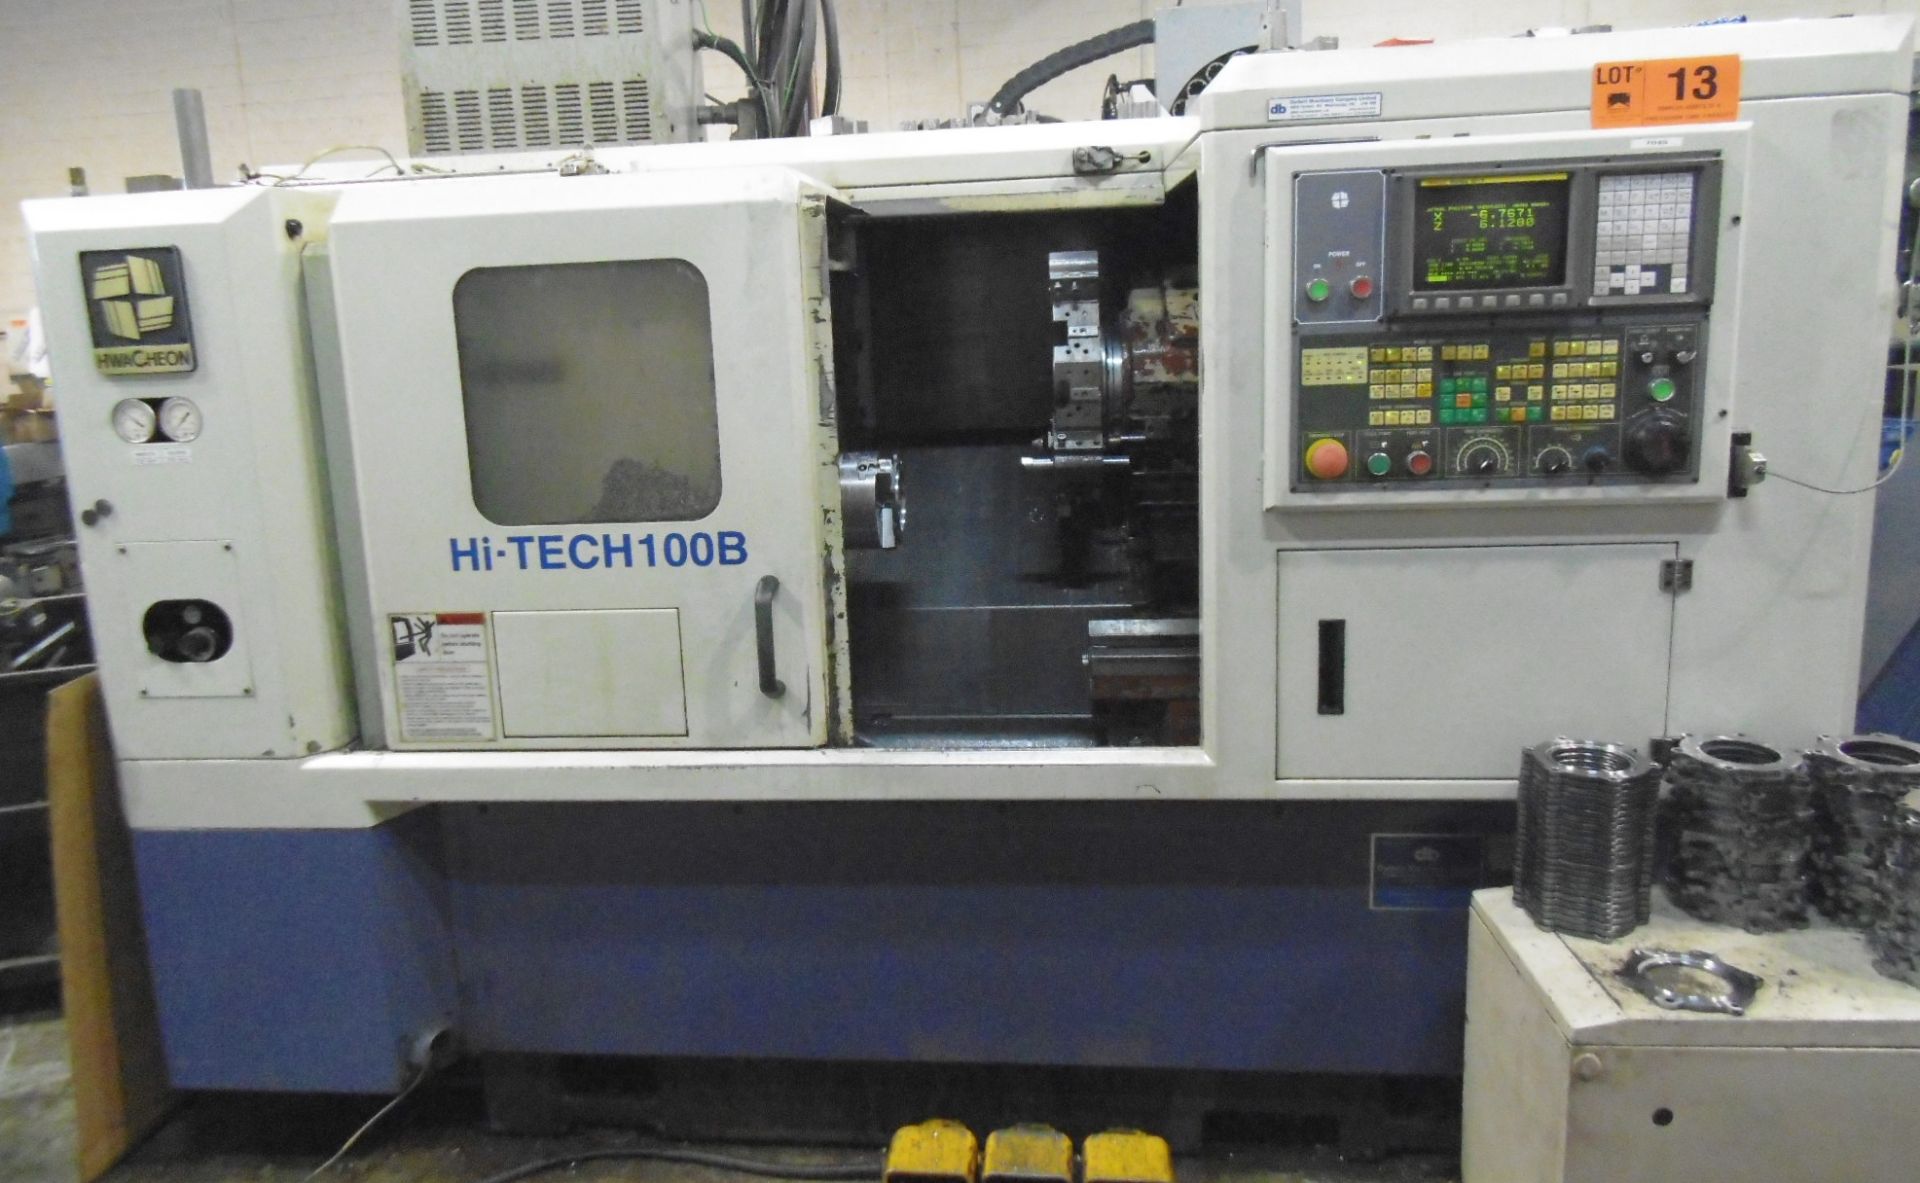 HWACHEON HI-TECH 100B CNC TURNING CENTER WITH FANUC SERIES Oi-T CNC CONTROL WITH TRAVELS X-6.7", Z- - Image 3 of 6